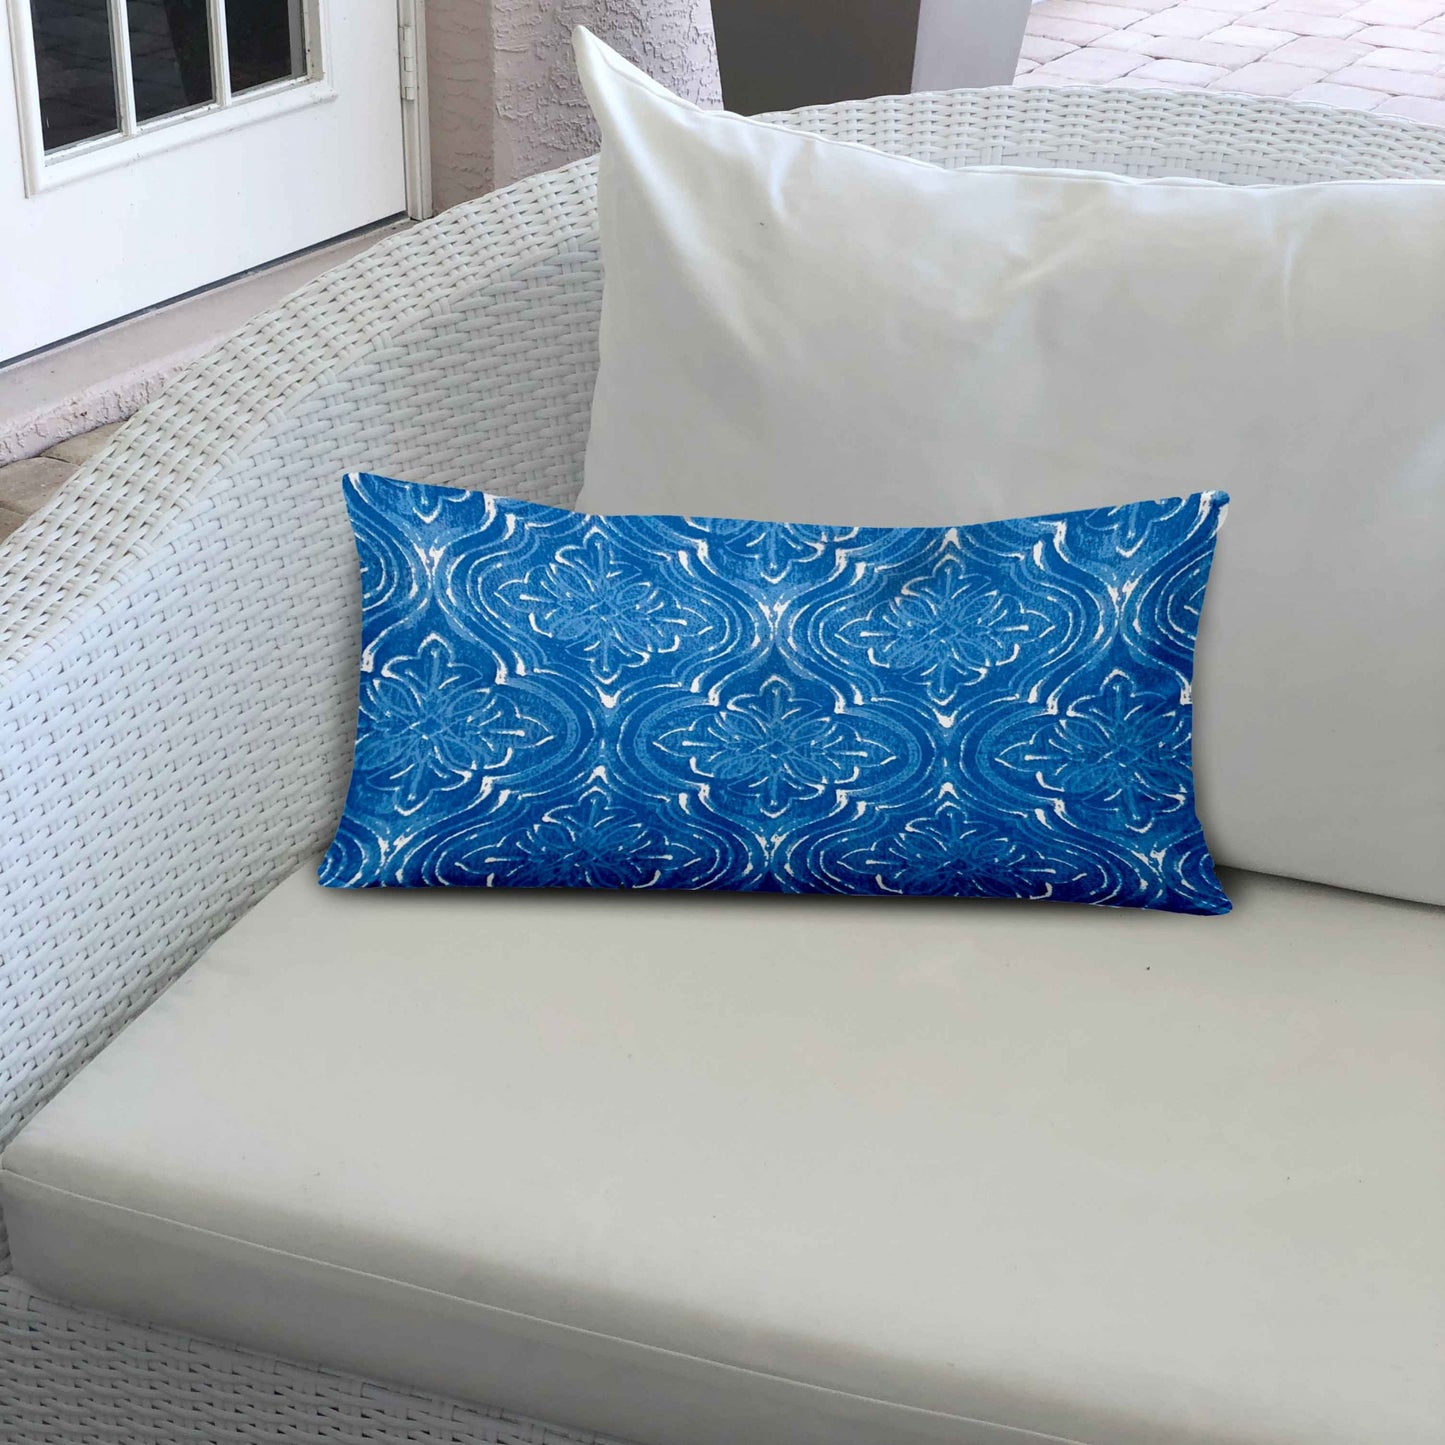 12" X 16" Blue And White Zippered Ogee Lumbar Indoor Outdoor Pillow Cover